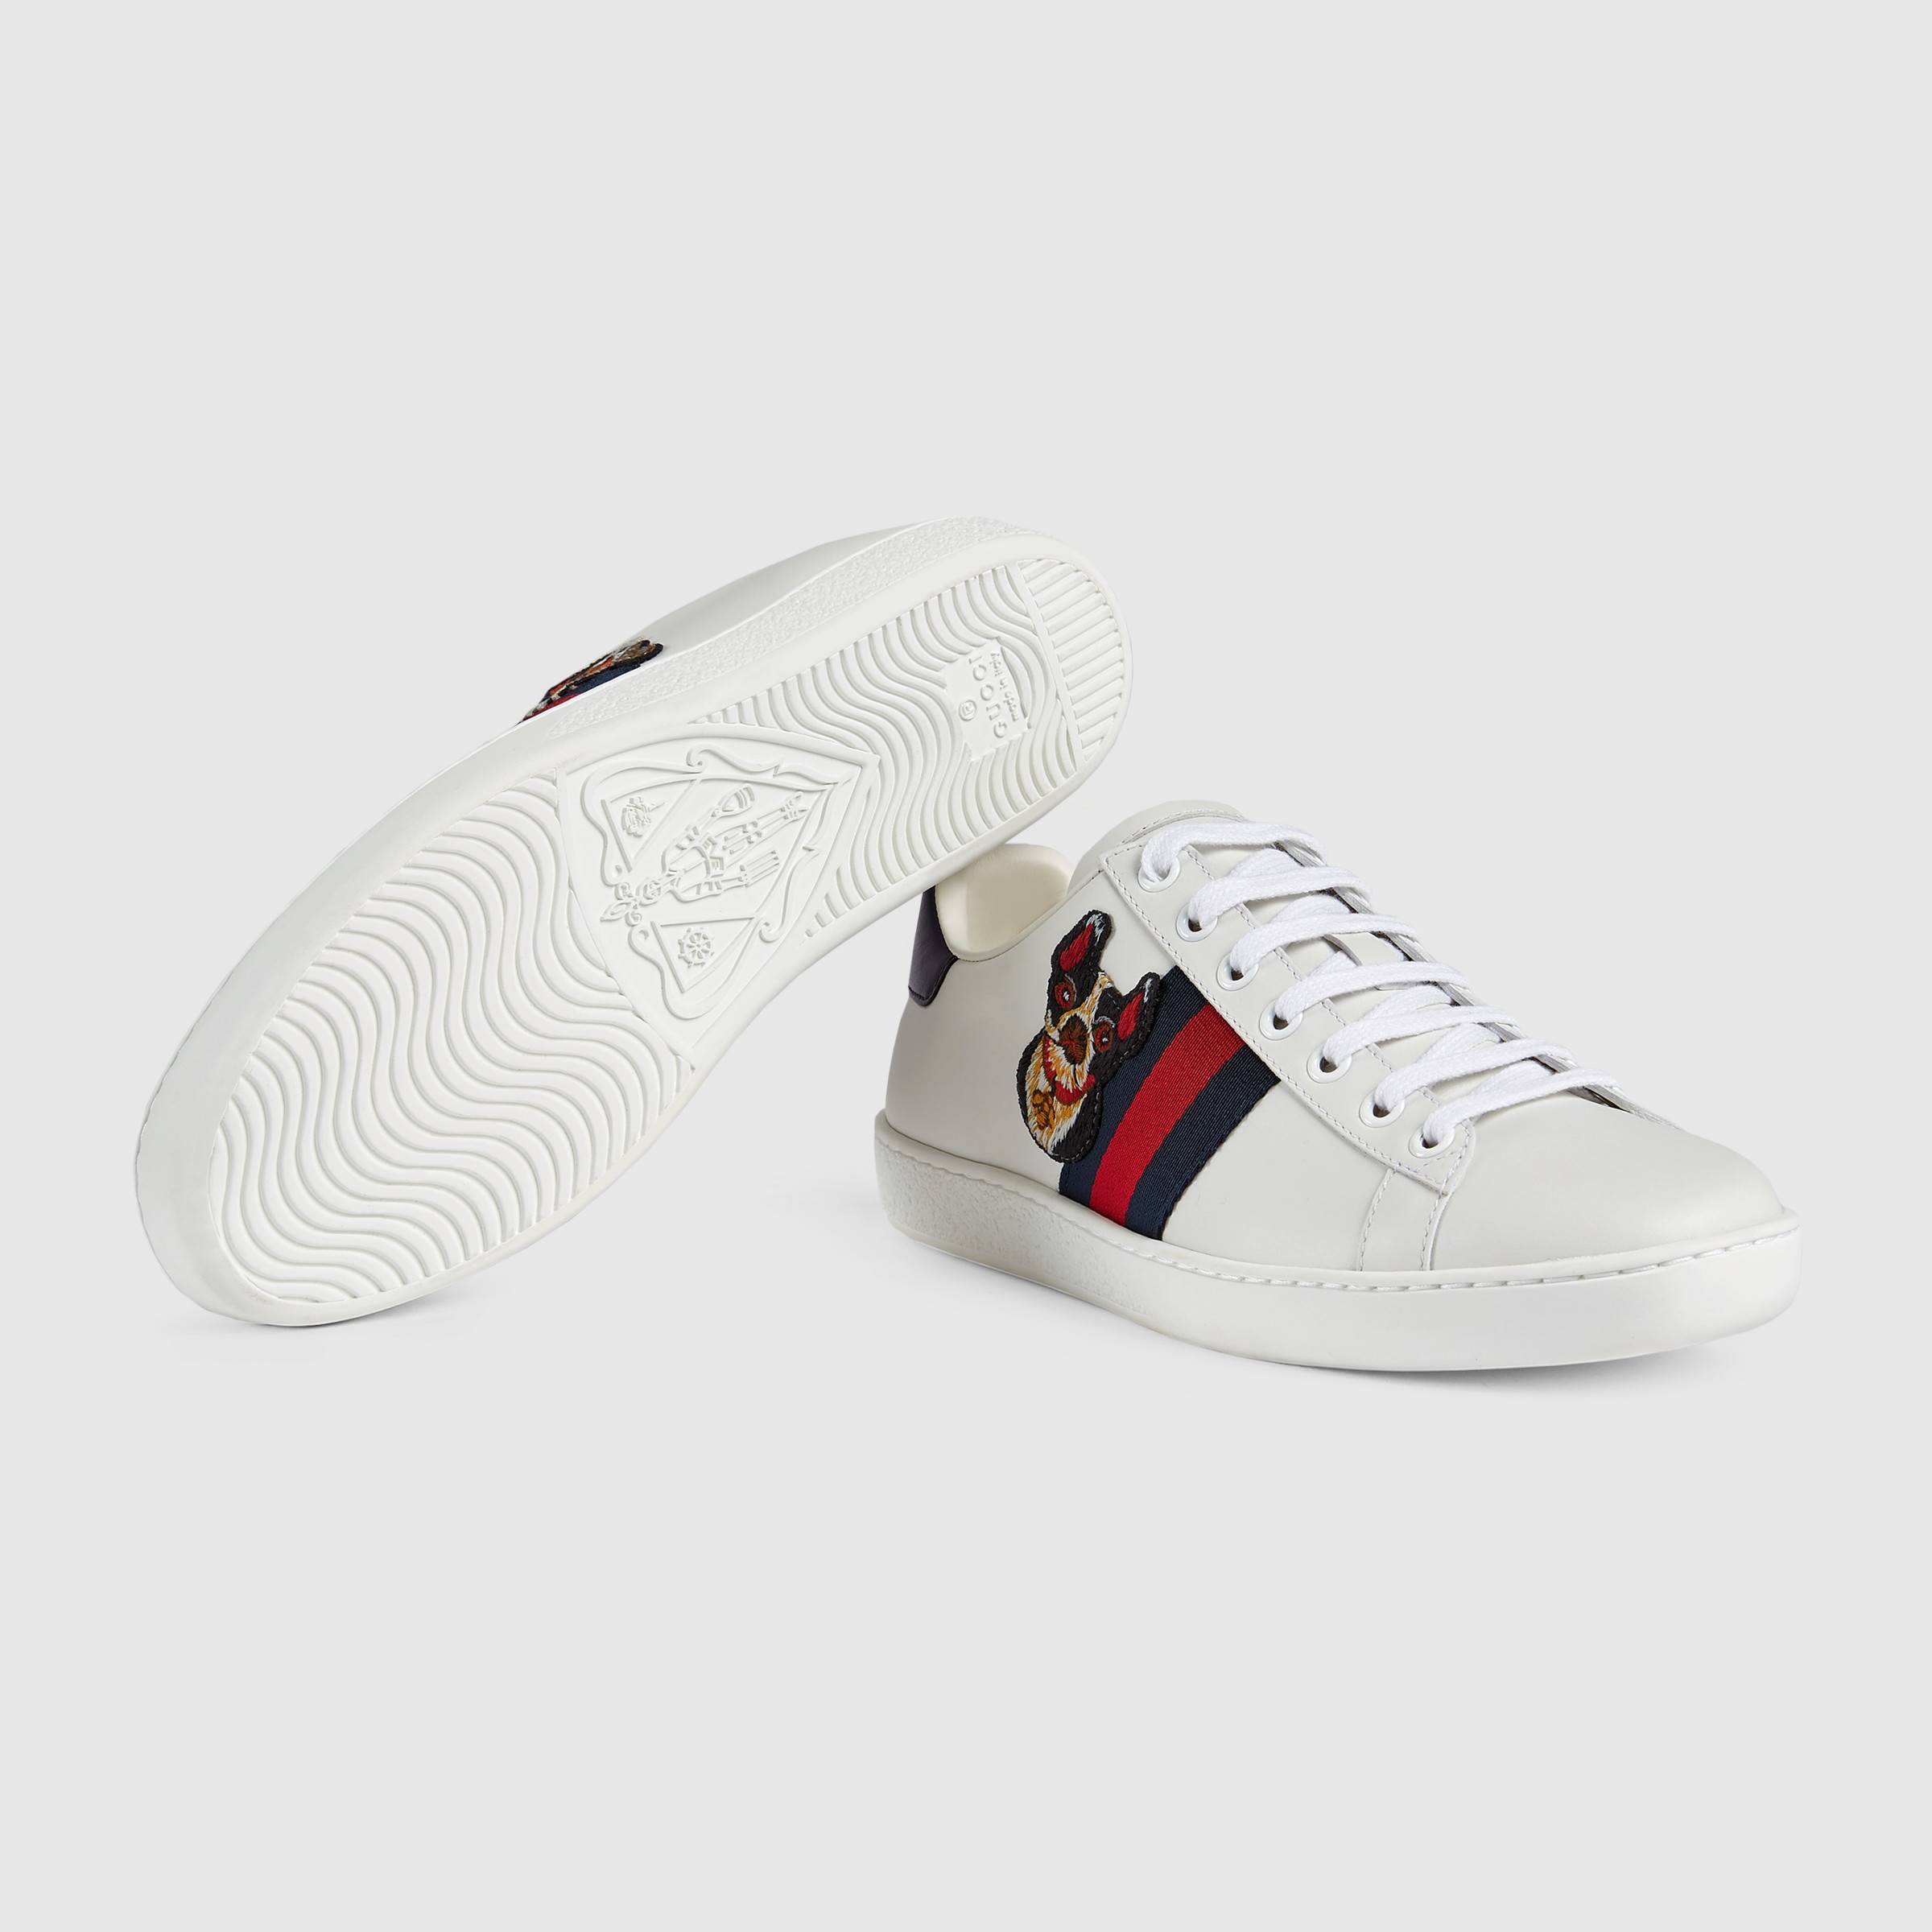 GIÀY GUCCI - WOMEN'S ACE EMBROIDERED SNEAKER - LOGO SNAKE